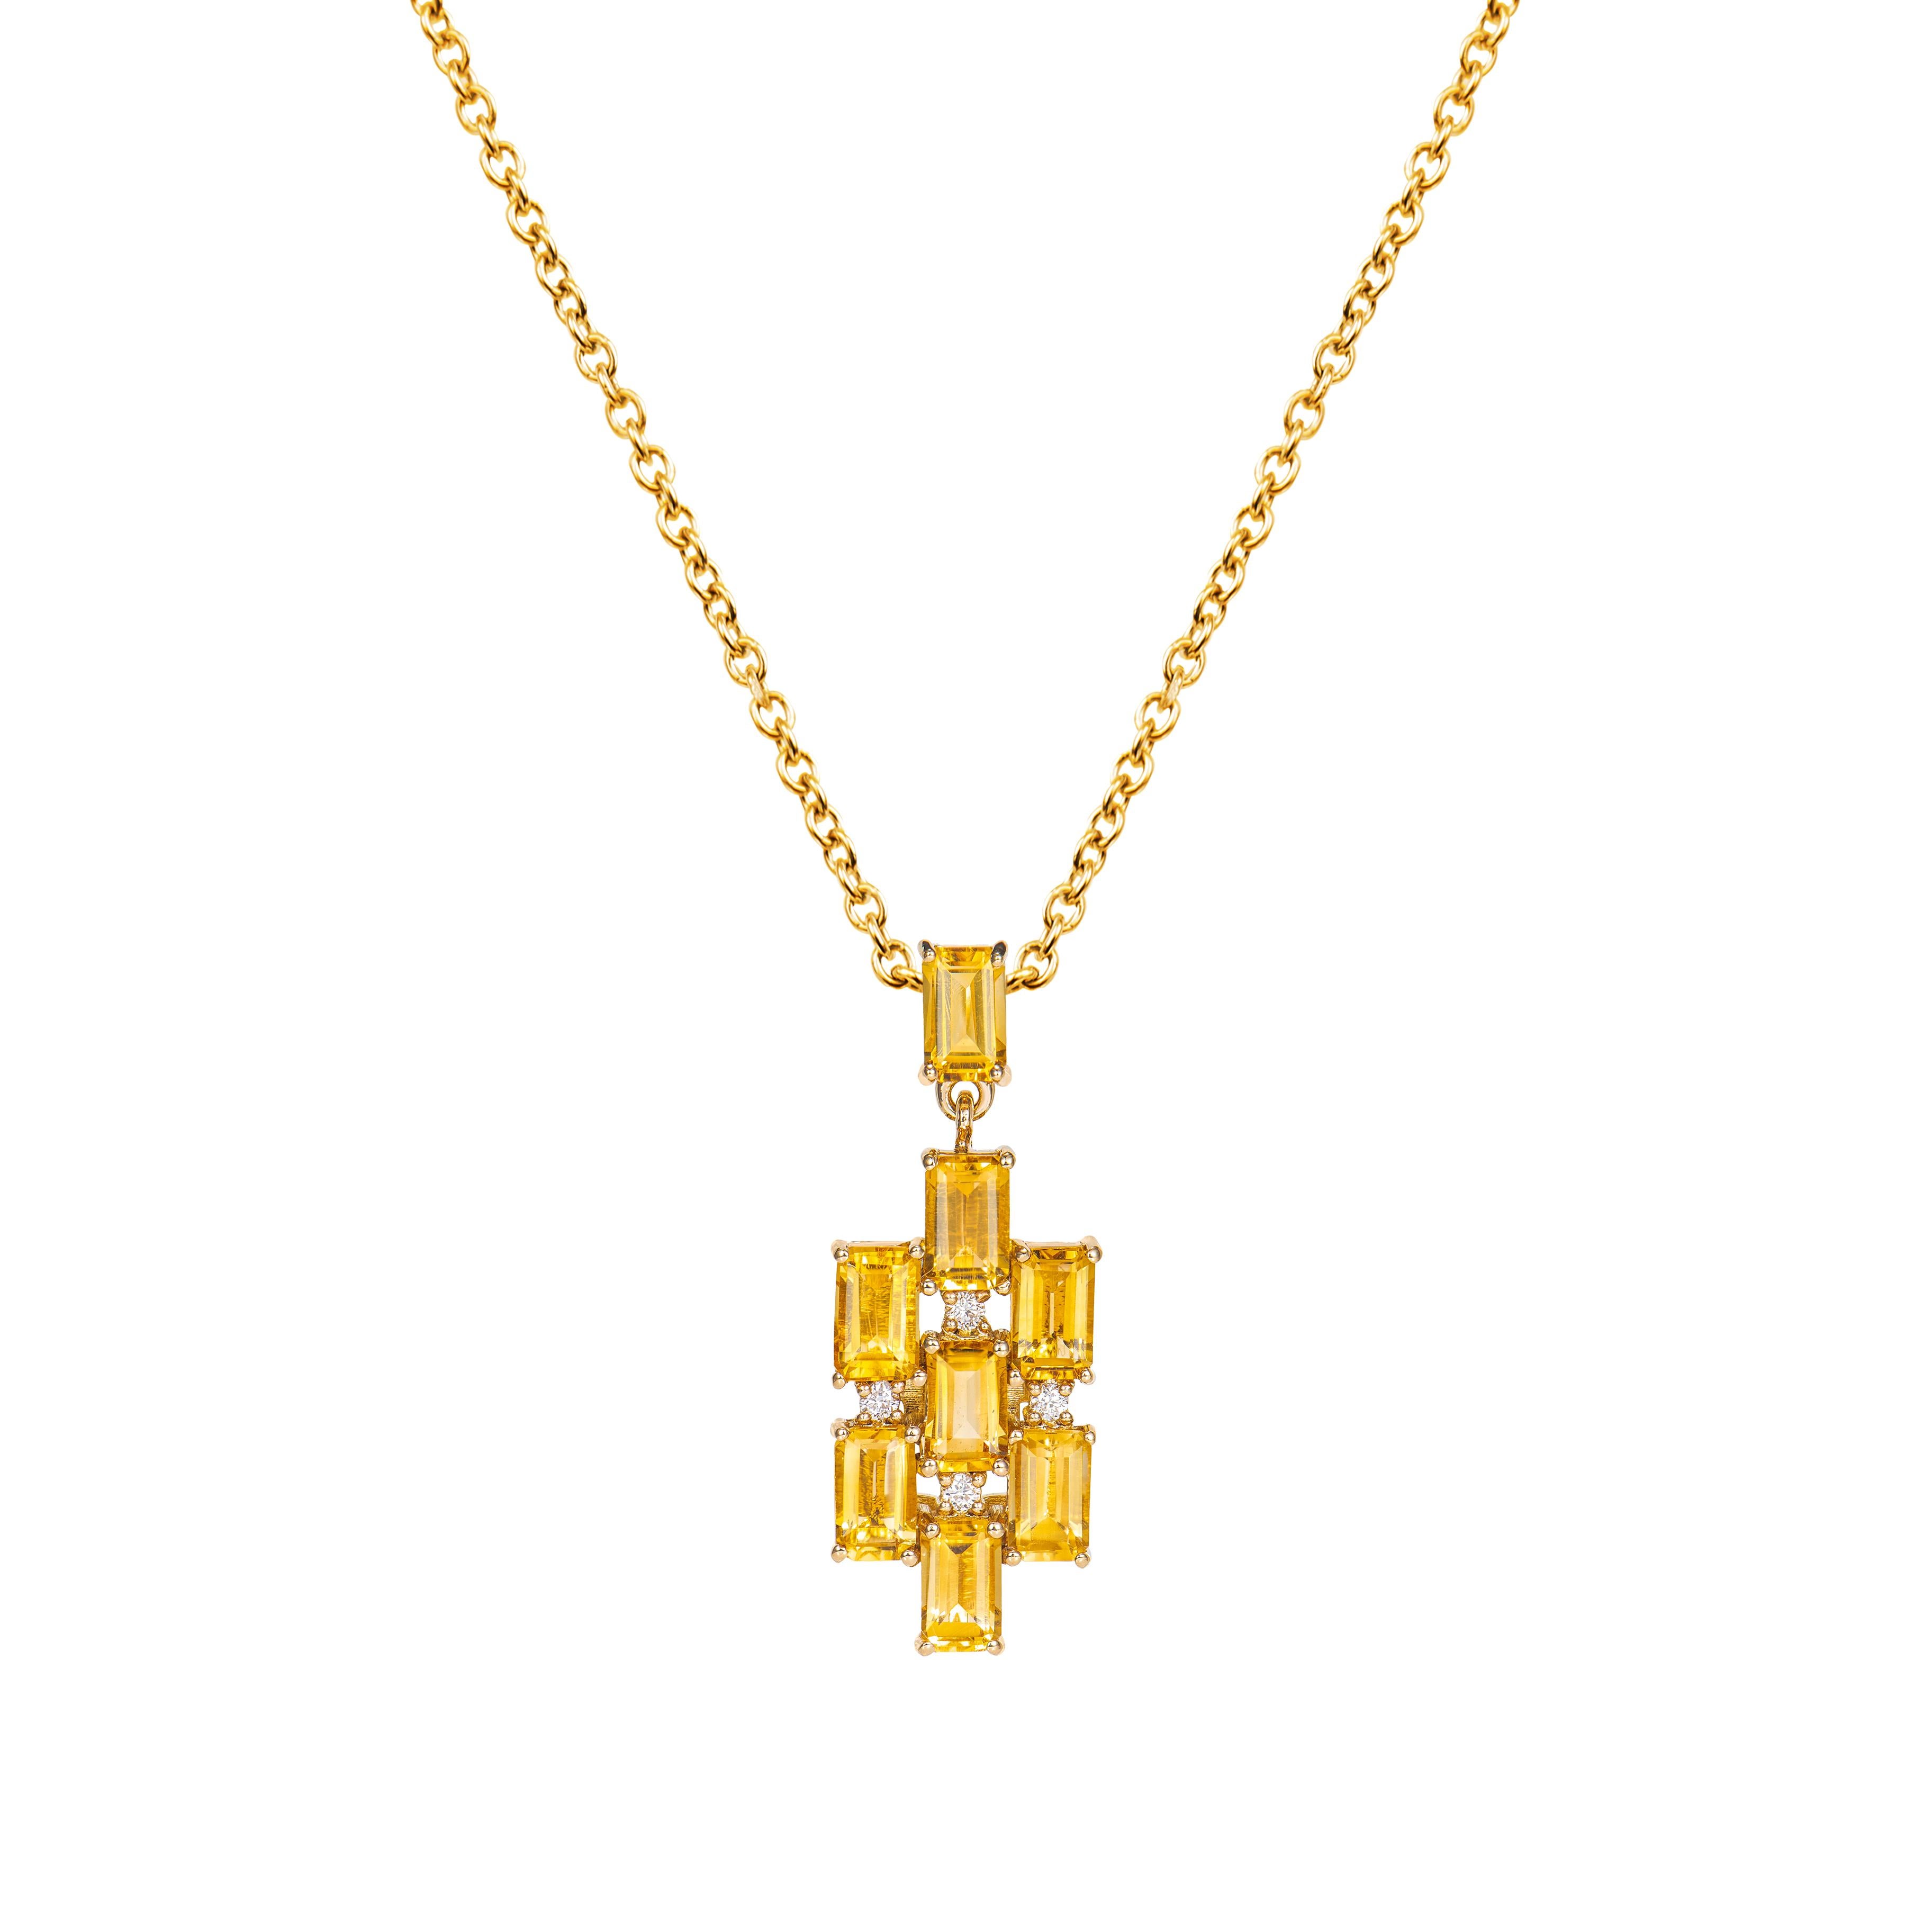 Contemporary 2.31 Carat Citrine Pendant in 18Karat Yellow Gold with White Diamond. For Sale